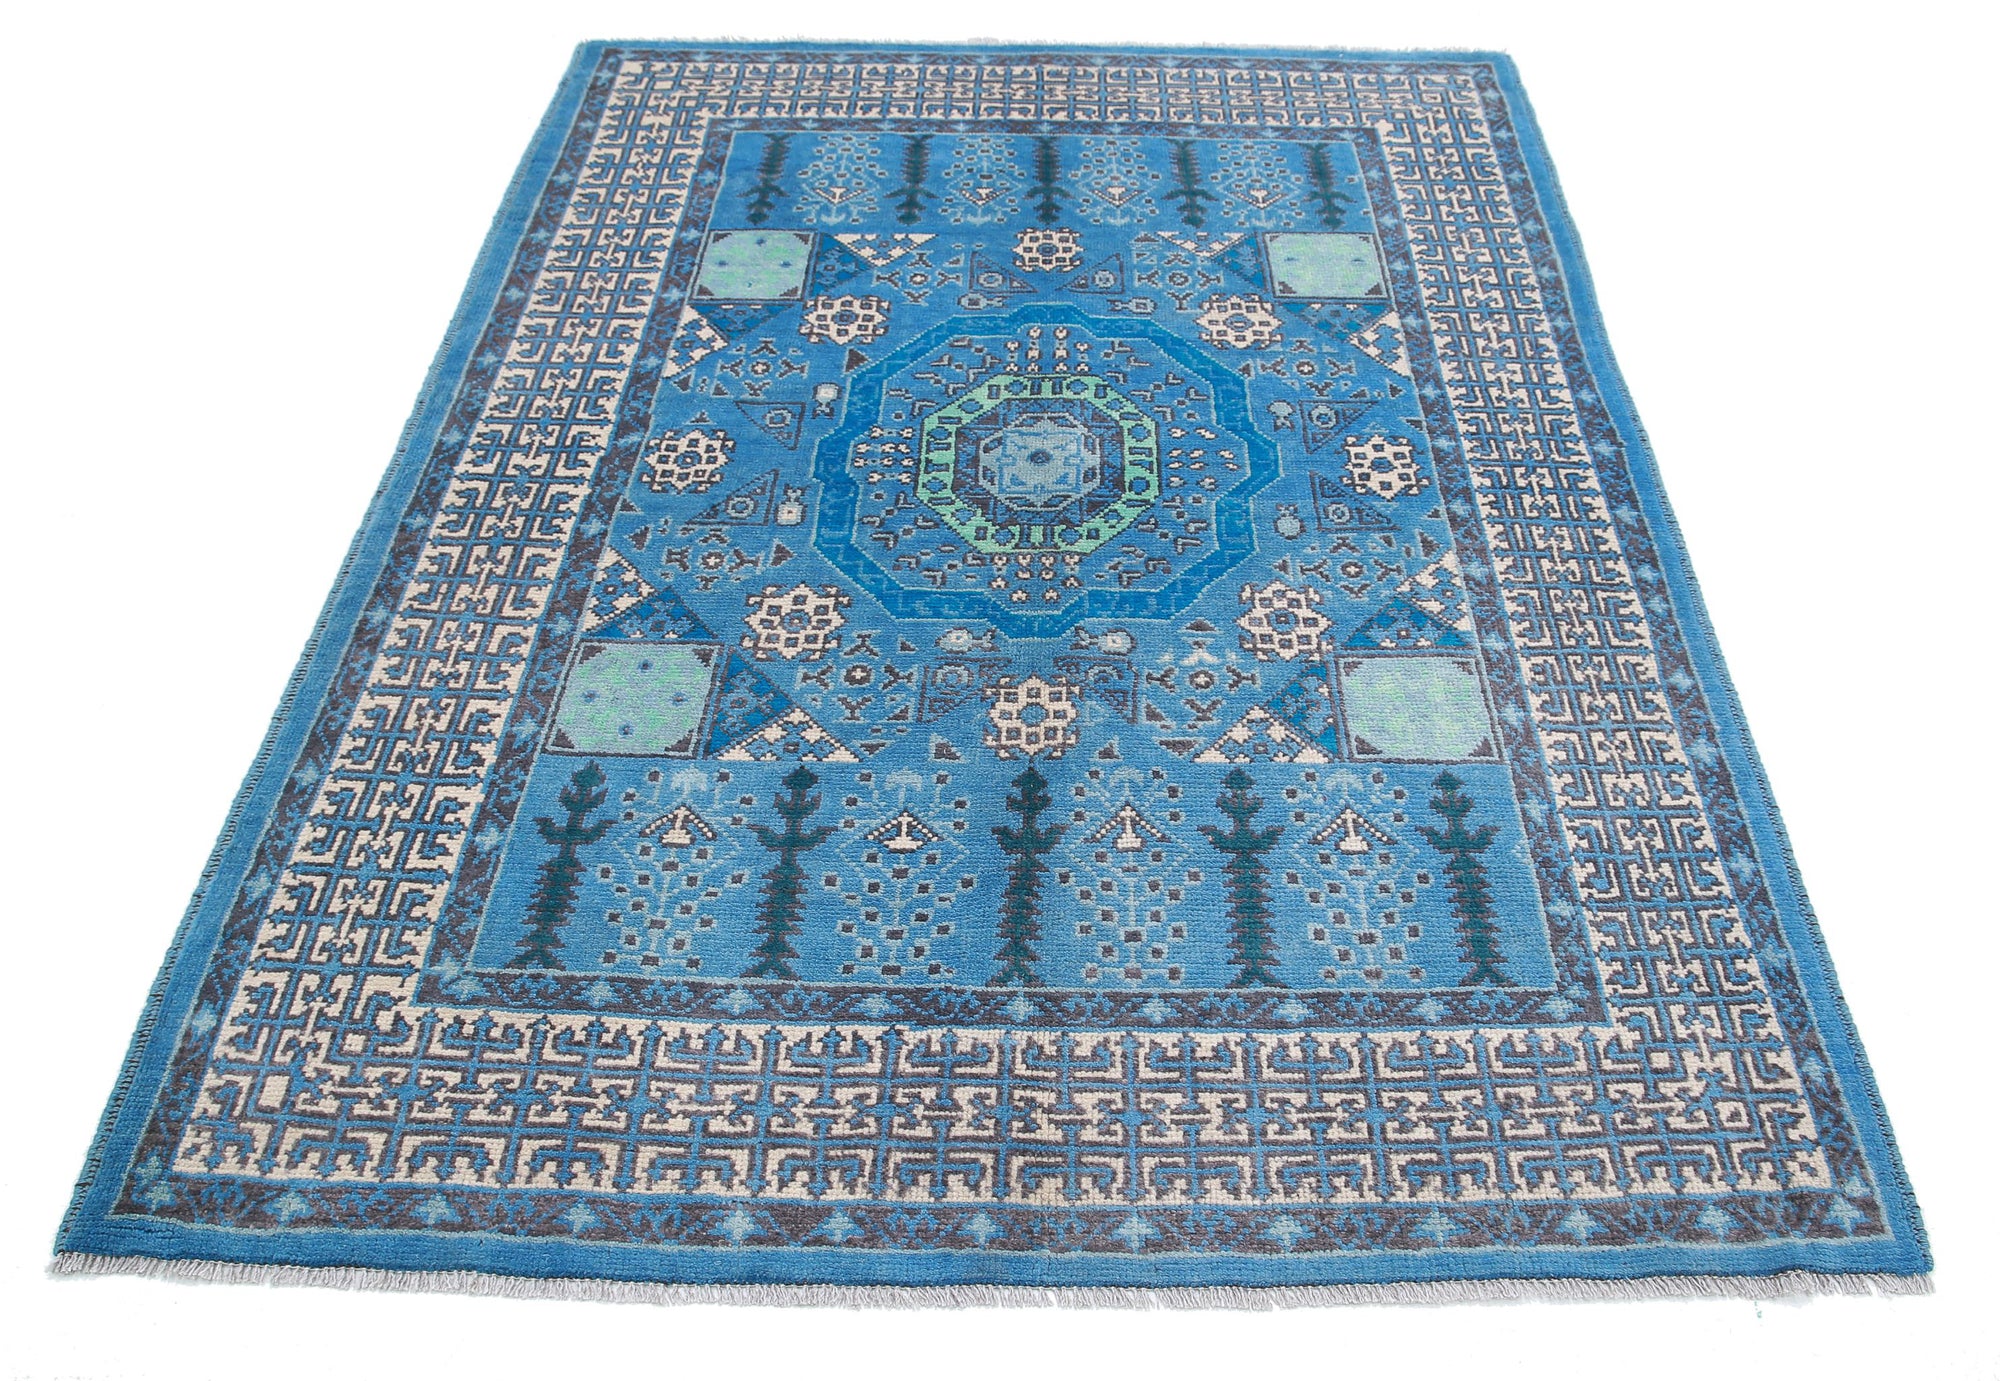 Revival-hand-knotted-qarghani-wool-rug-5014099-3.jpg